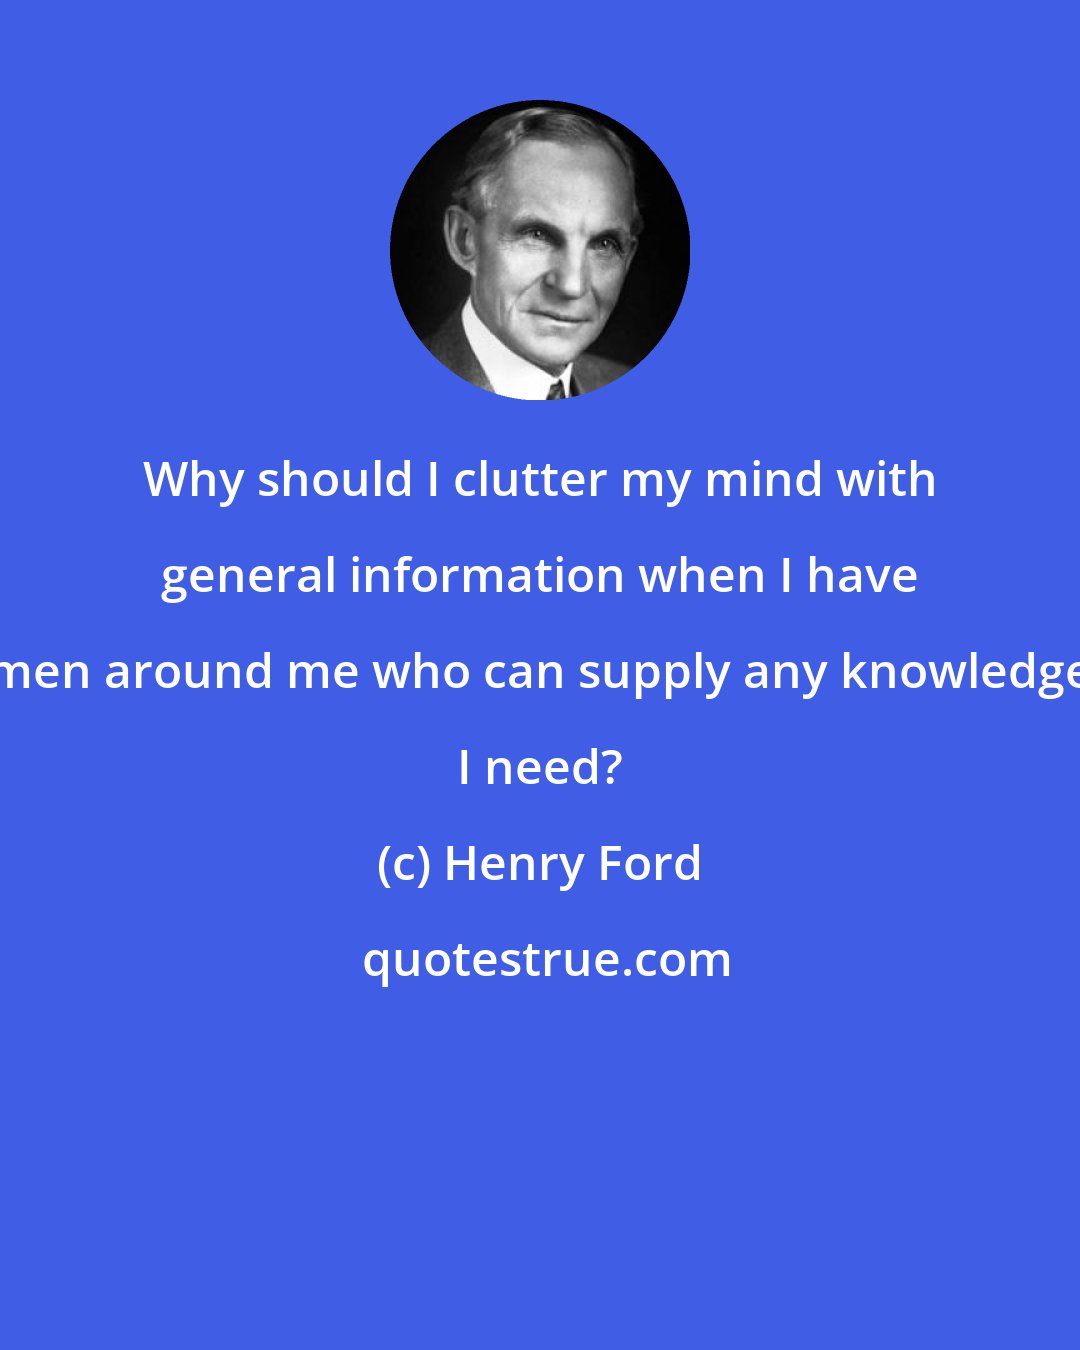 Henry Ford: Why should I clutter my mind with general information when I have men around me who can supply any knowledge I need?